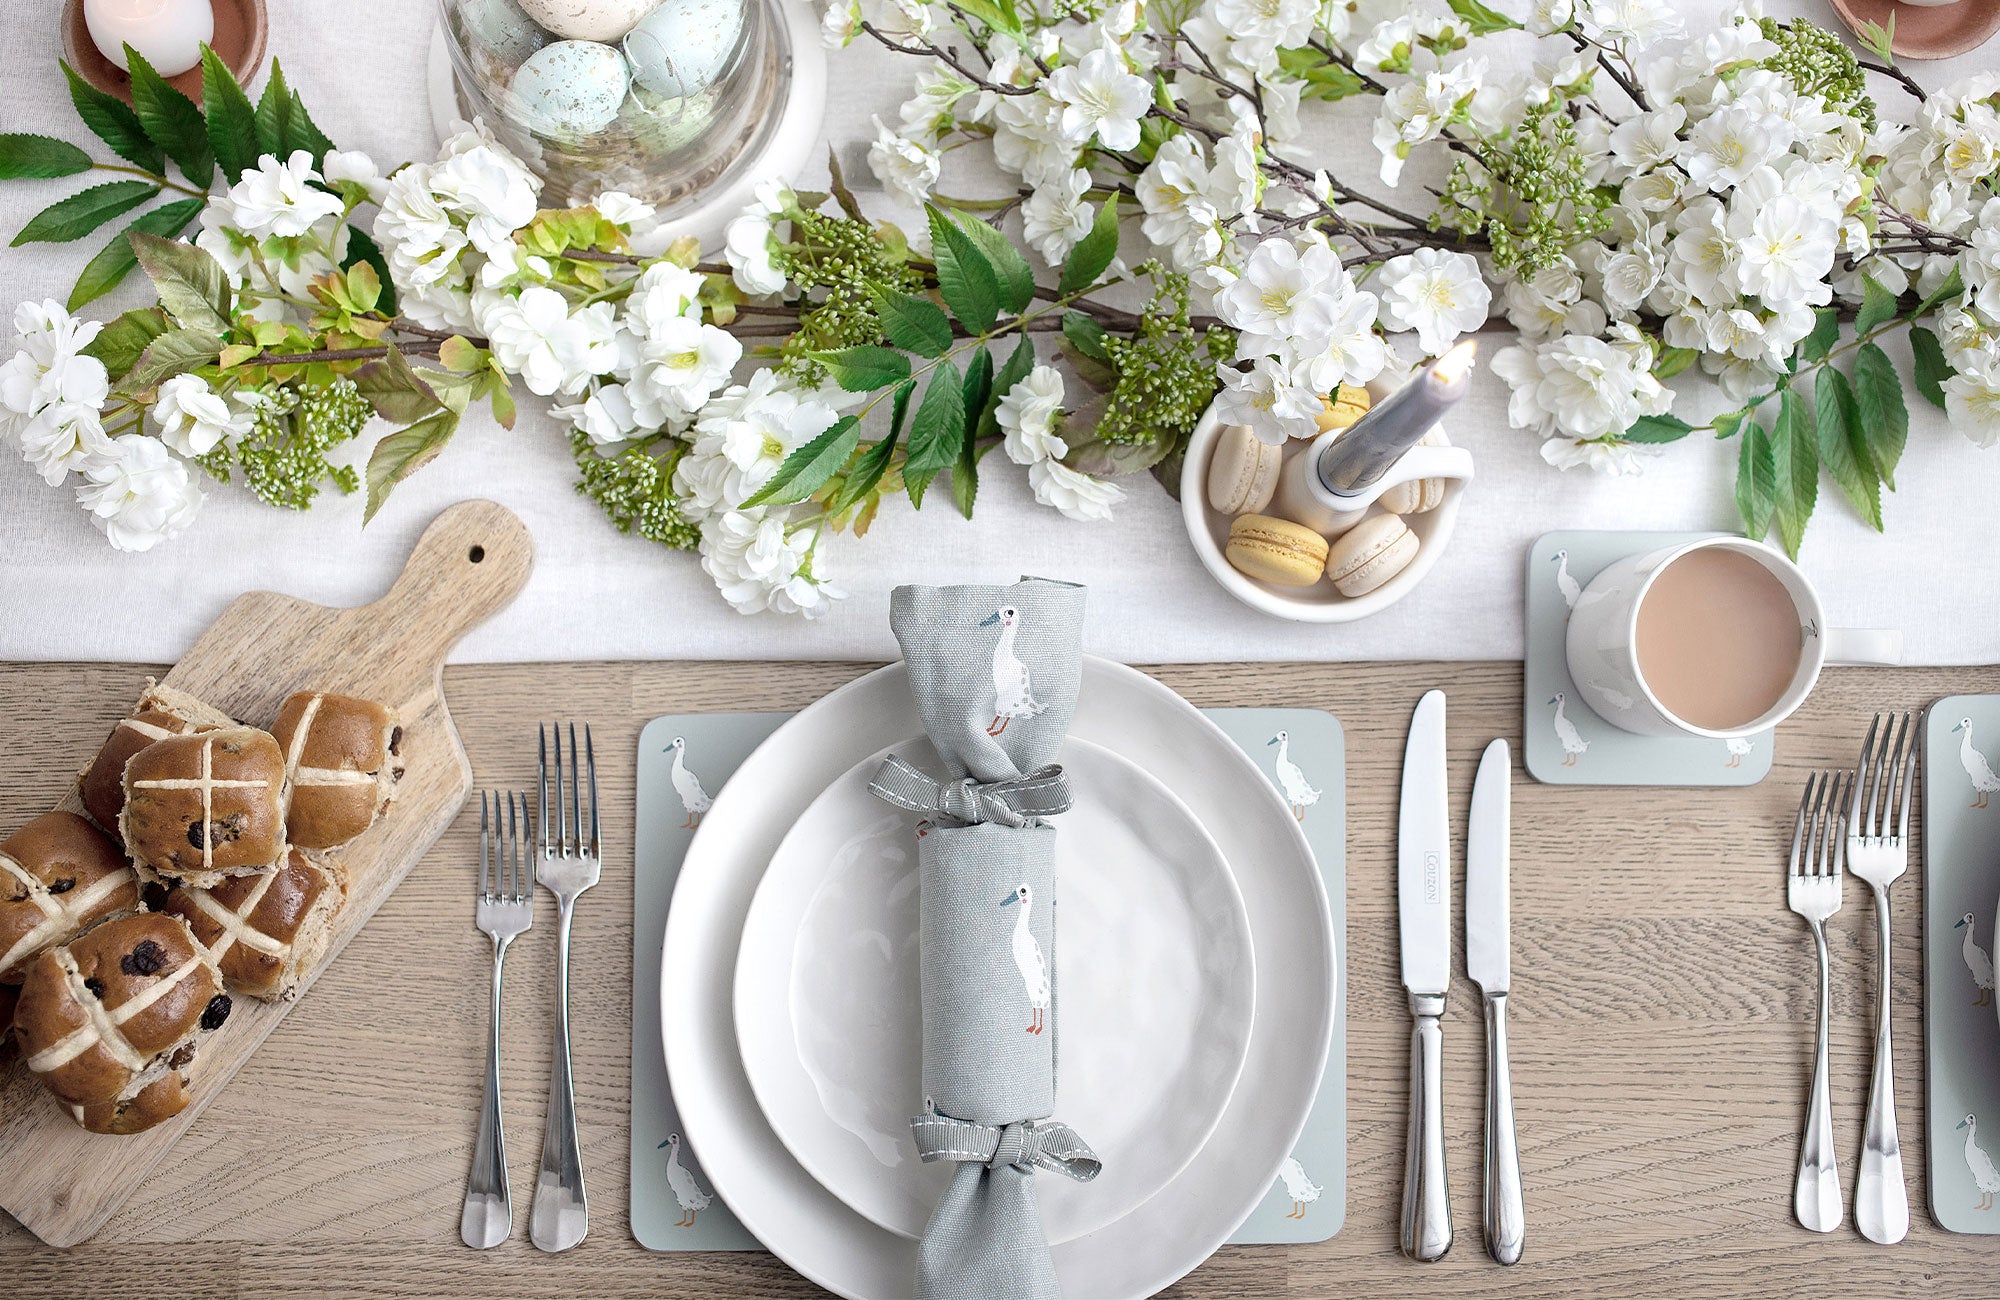 Five Spring Table Settings Ideas We’re Hopping Mad About